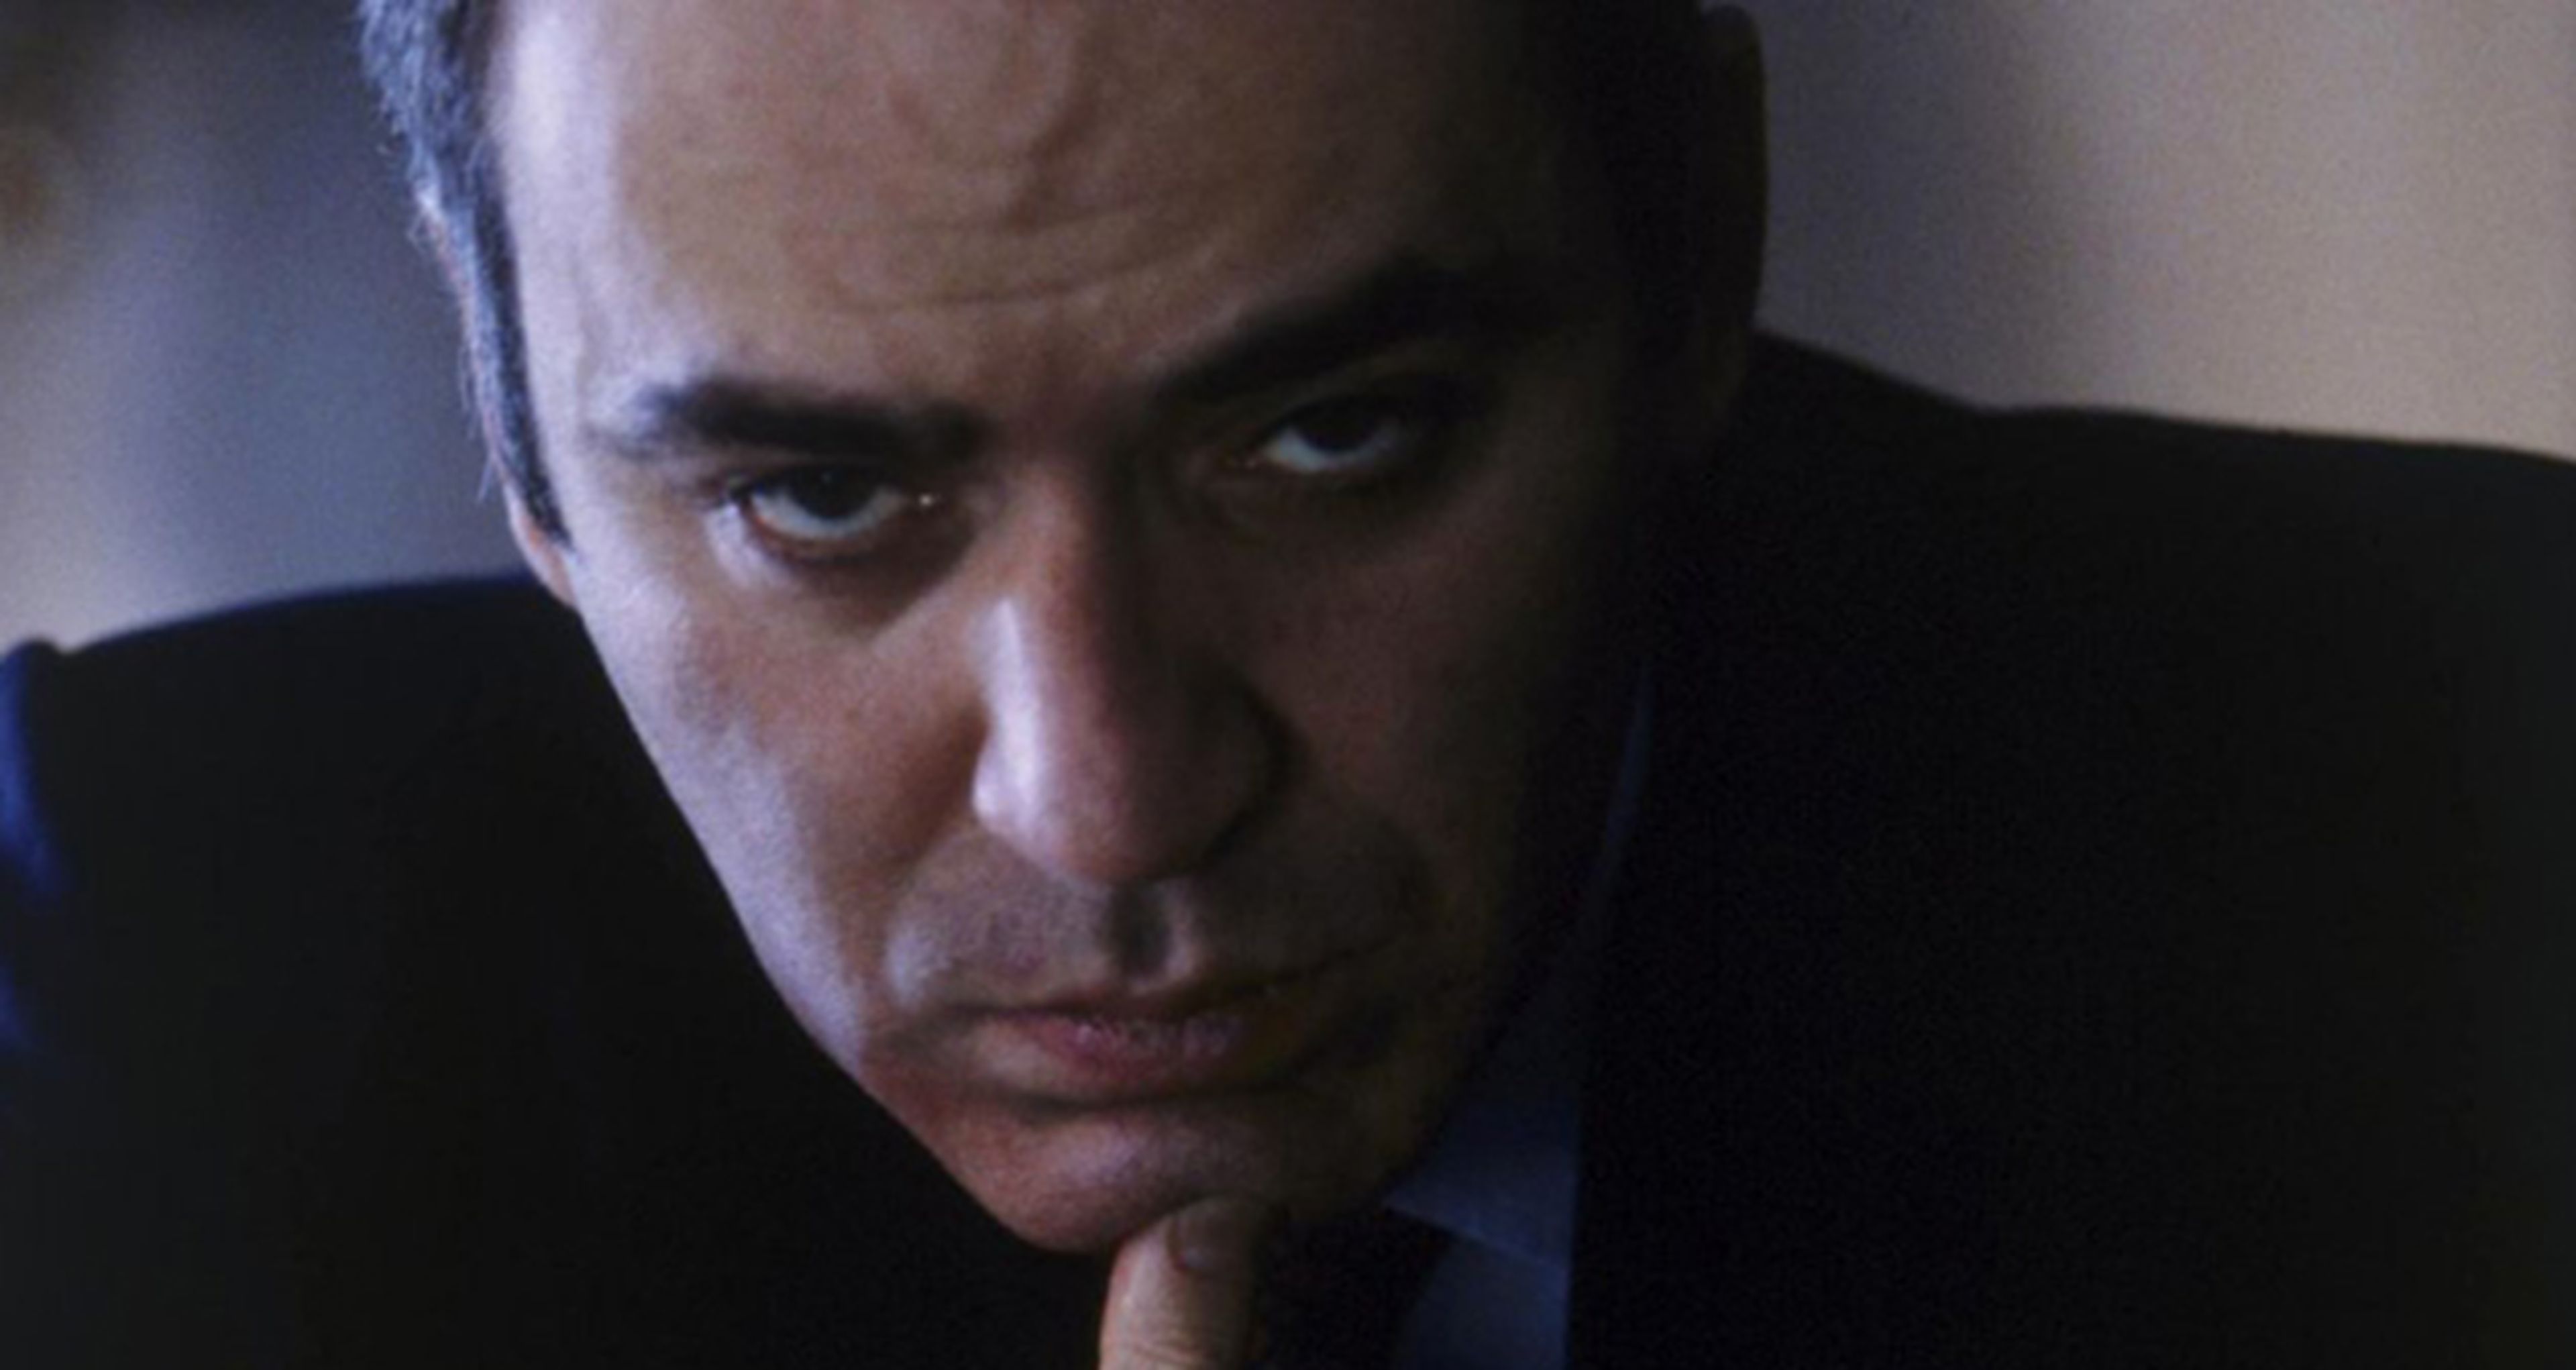  Game Over - Kasparov and the Machine : Marc Ghannoum